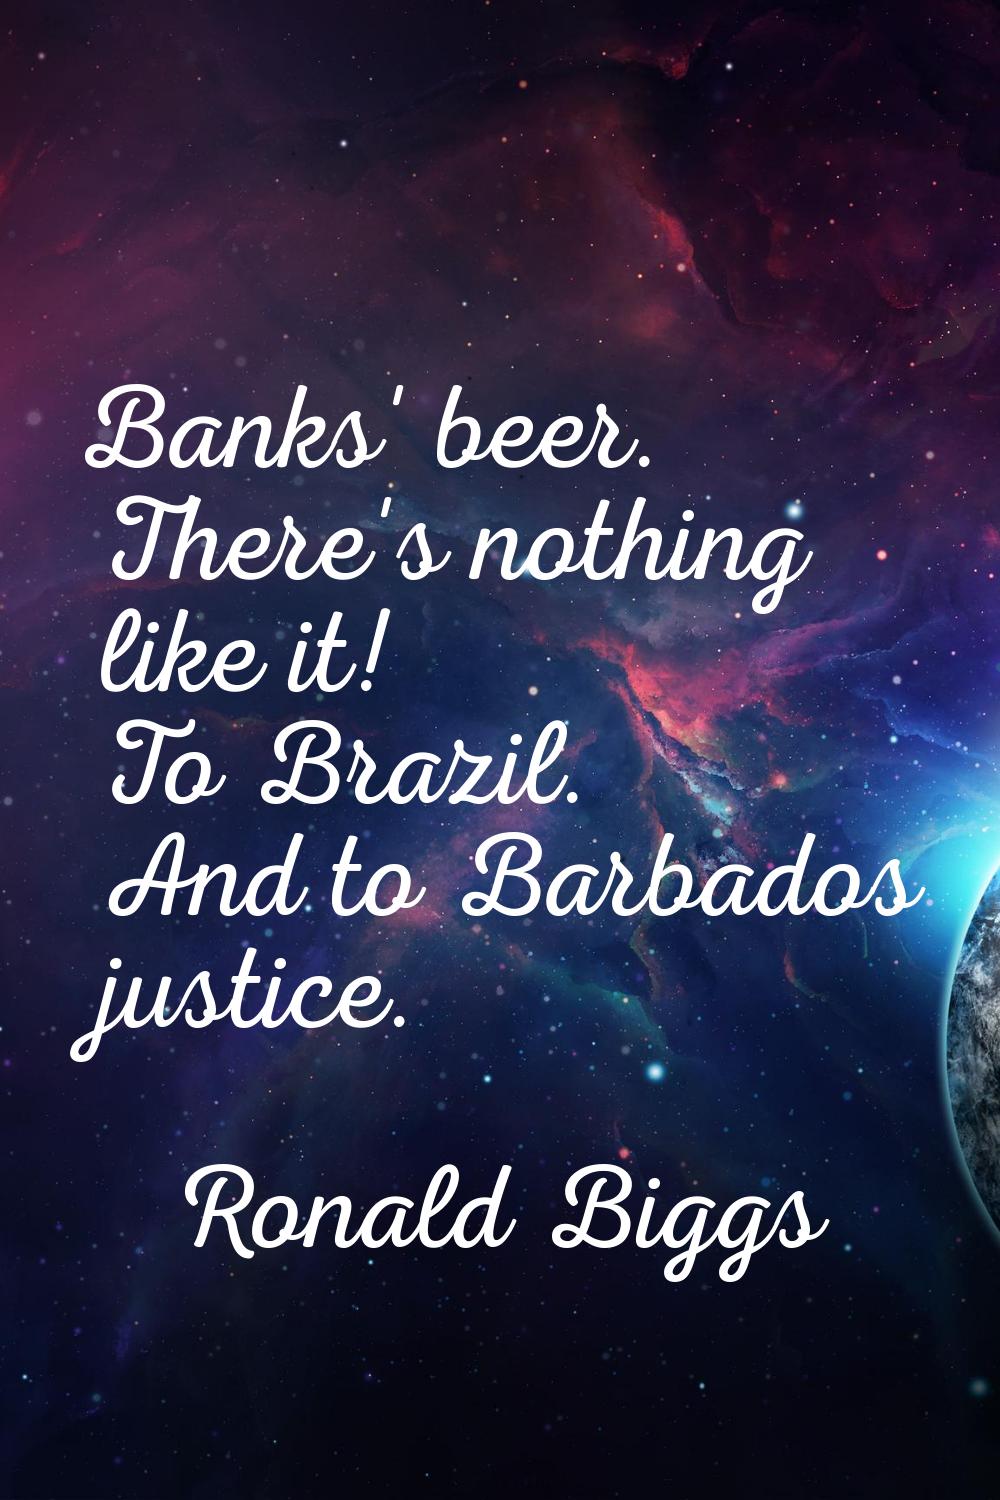 Banks' beer. There's nothing like it! To Brazil. And to Barbados justice.